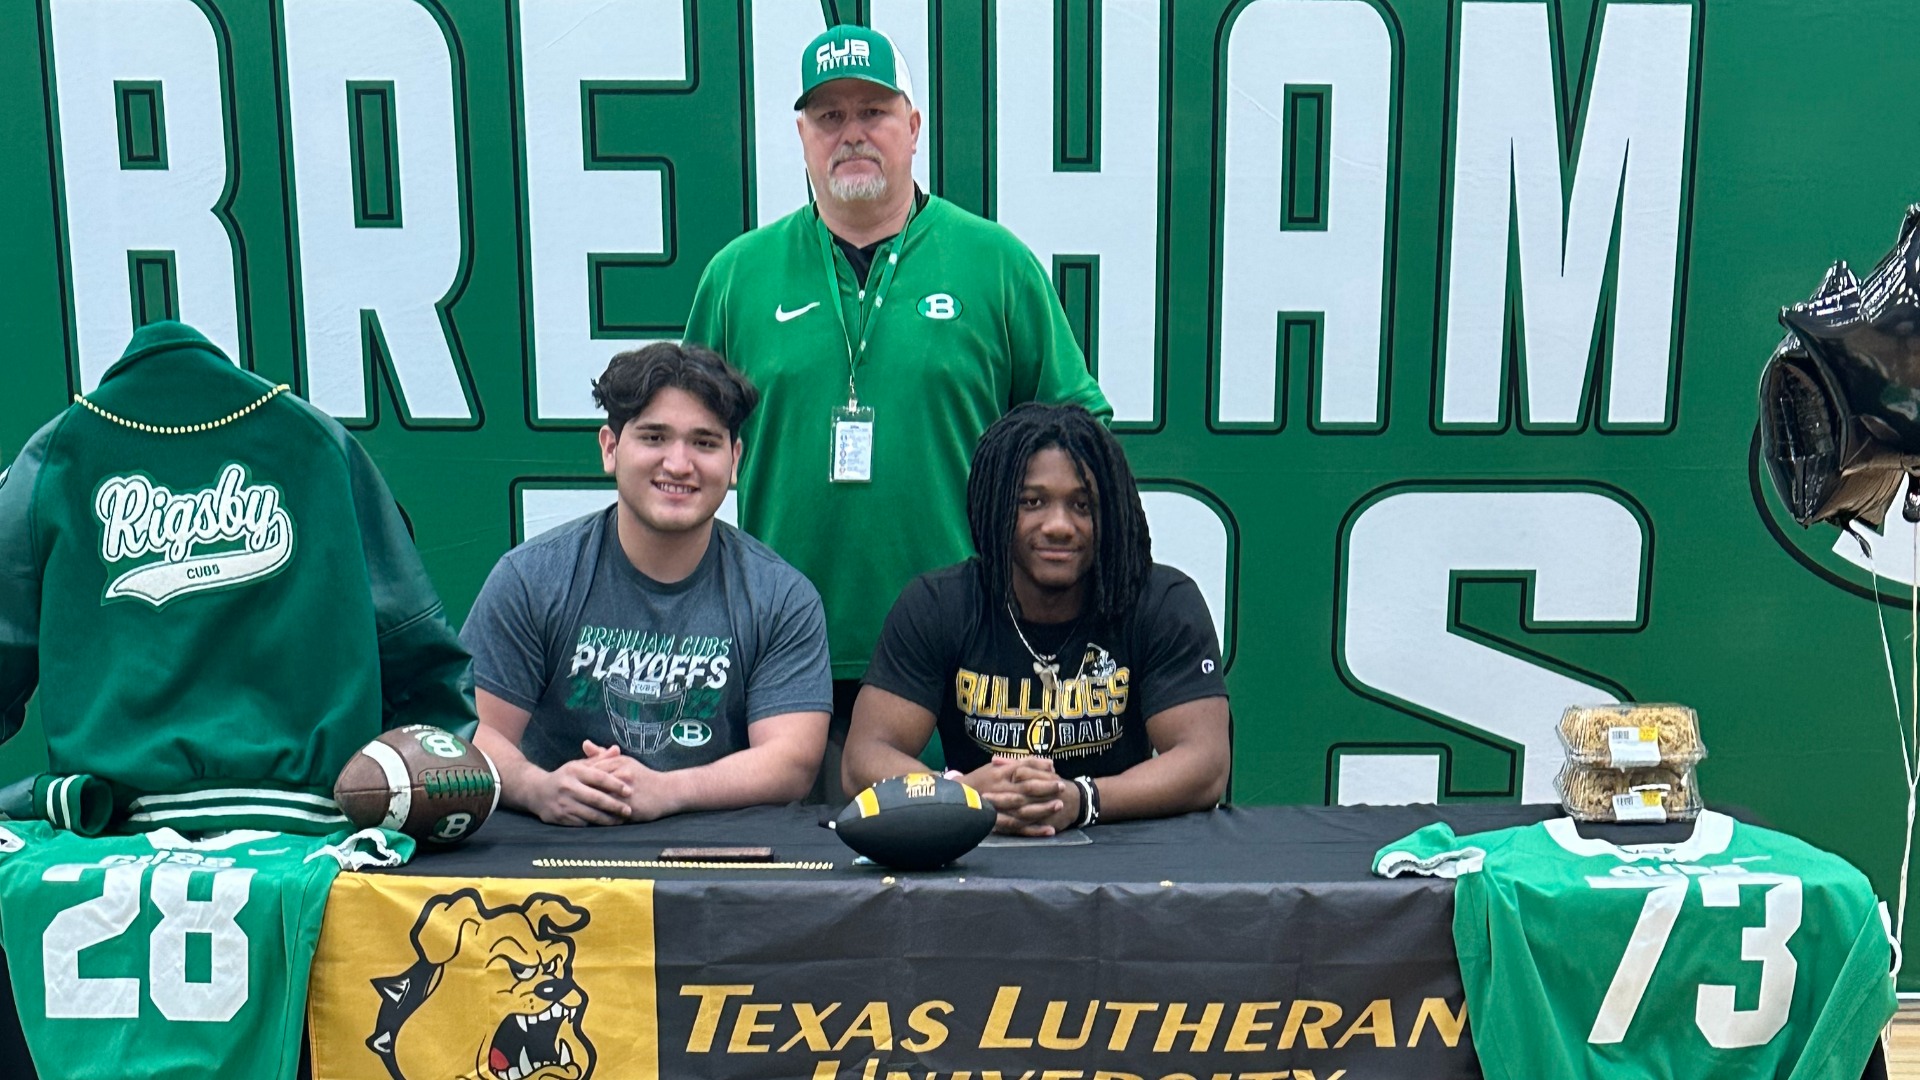 Slide 4 - Miguel Rodriguez, John Rigsby Sign with Texas Lutheran University